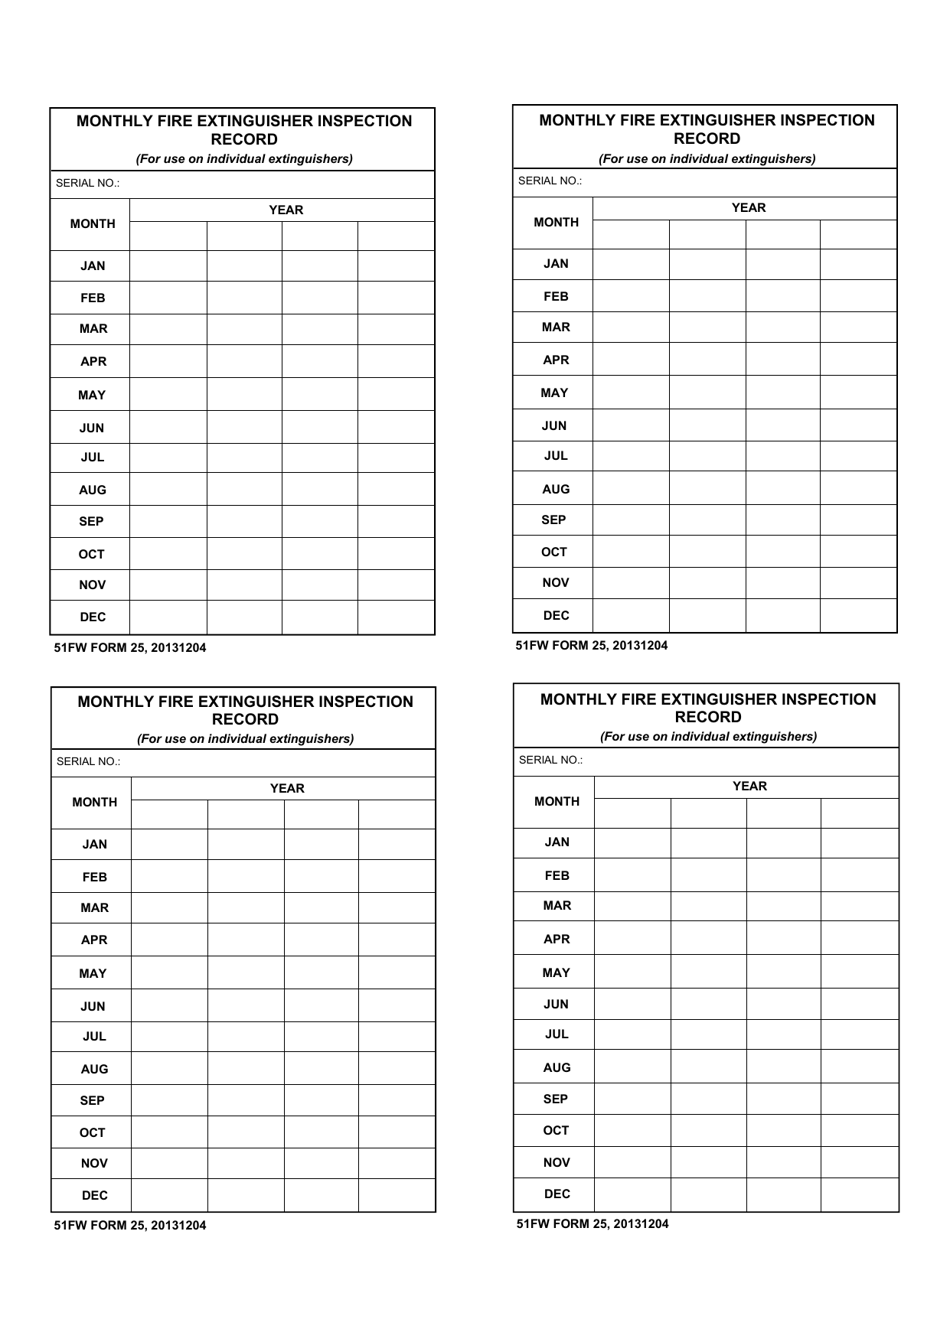 51 FW Form 25 Monthly Fire Extinguisher Insepction Record, Page 1